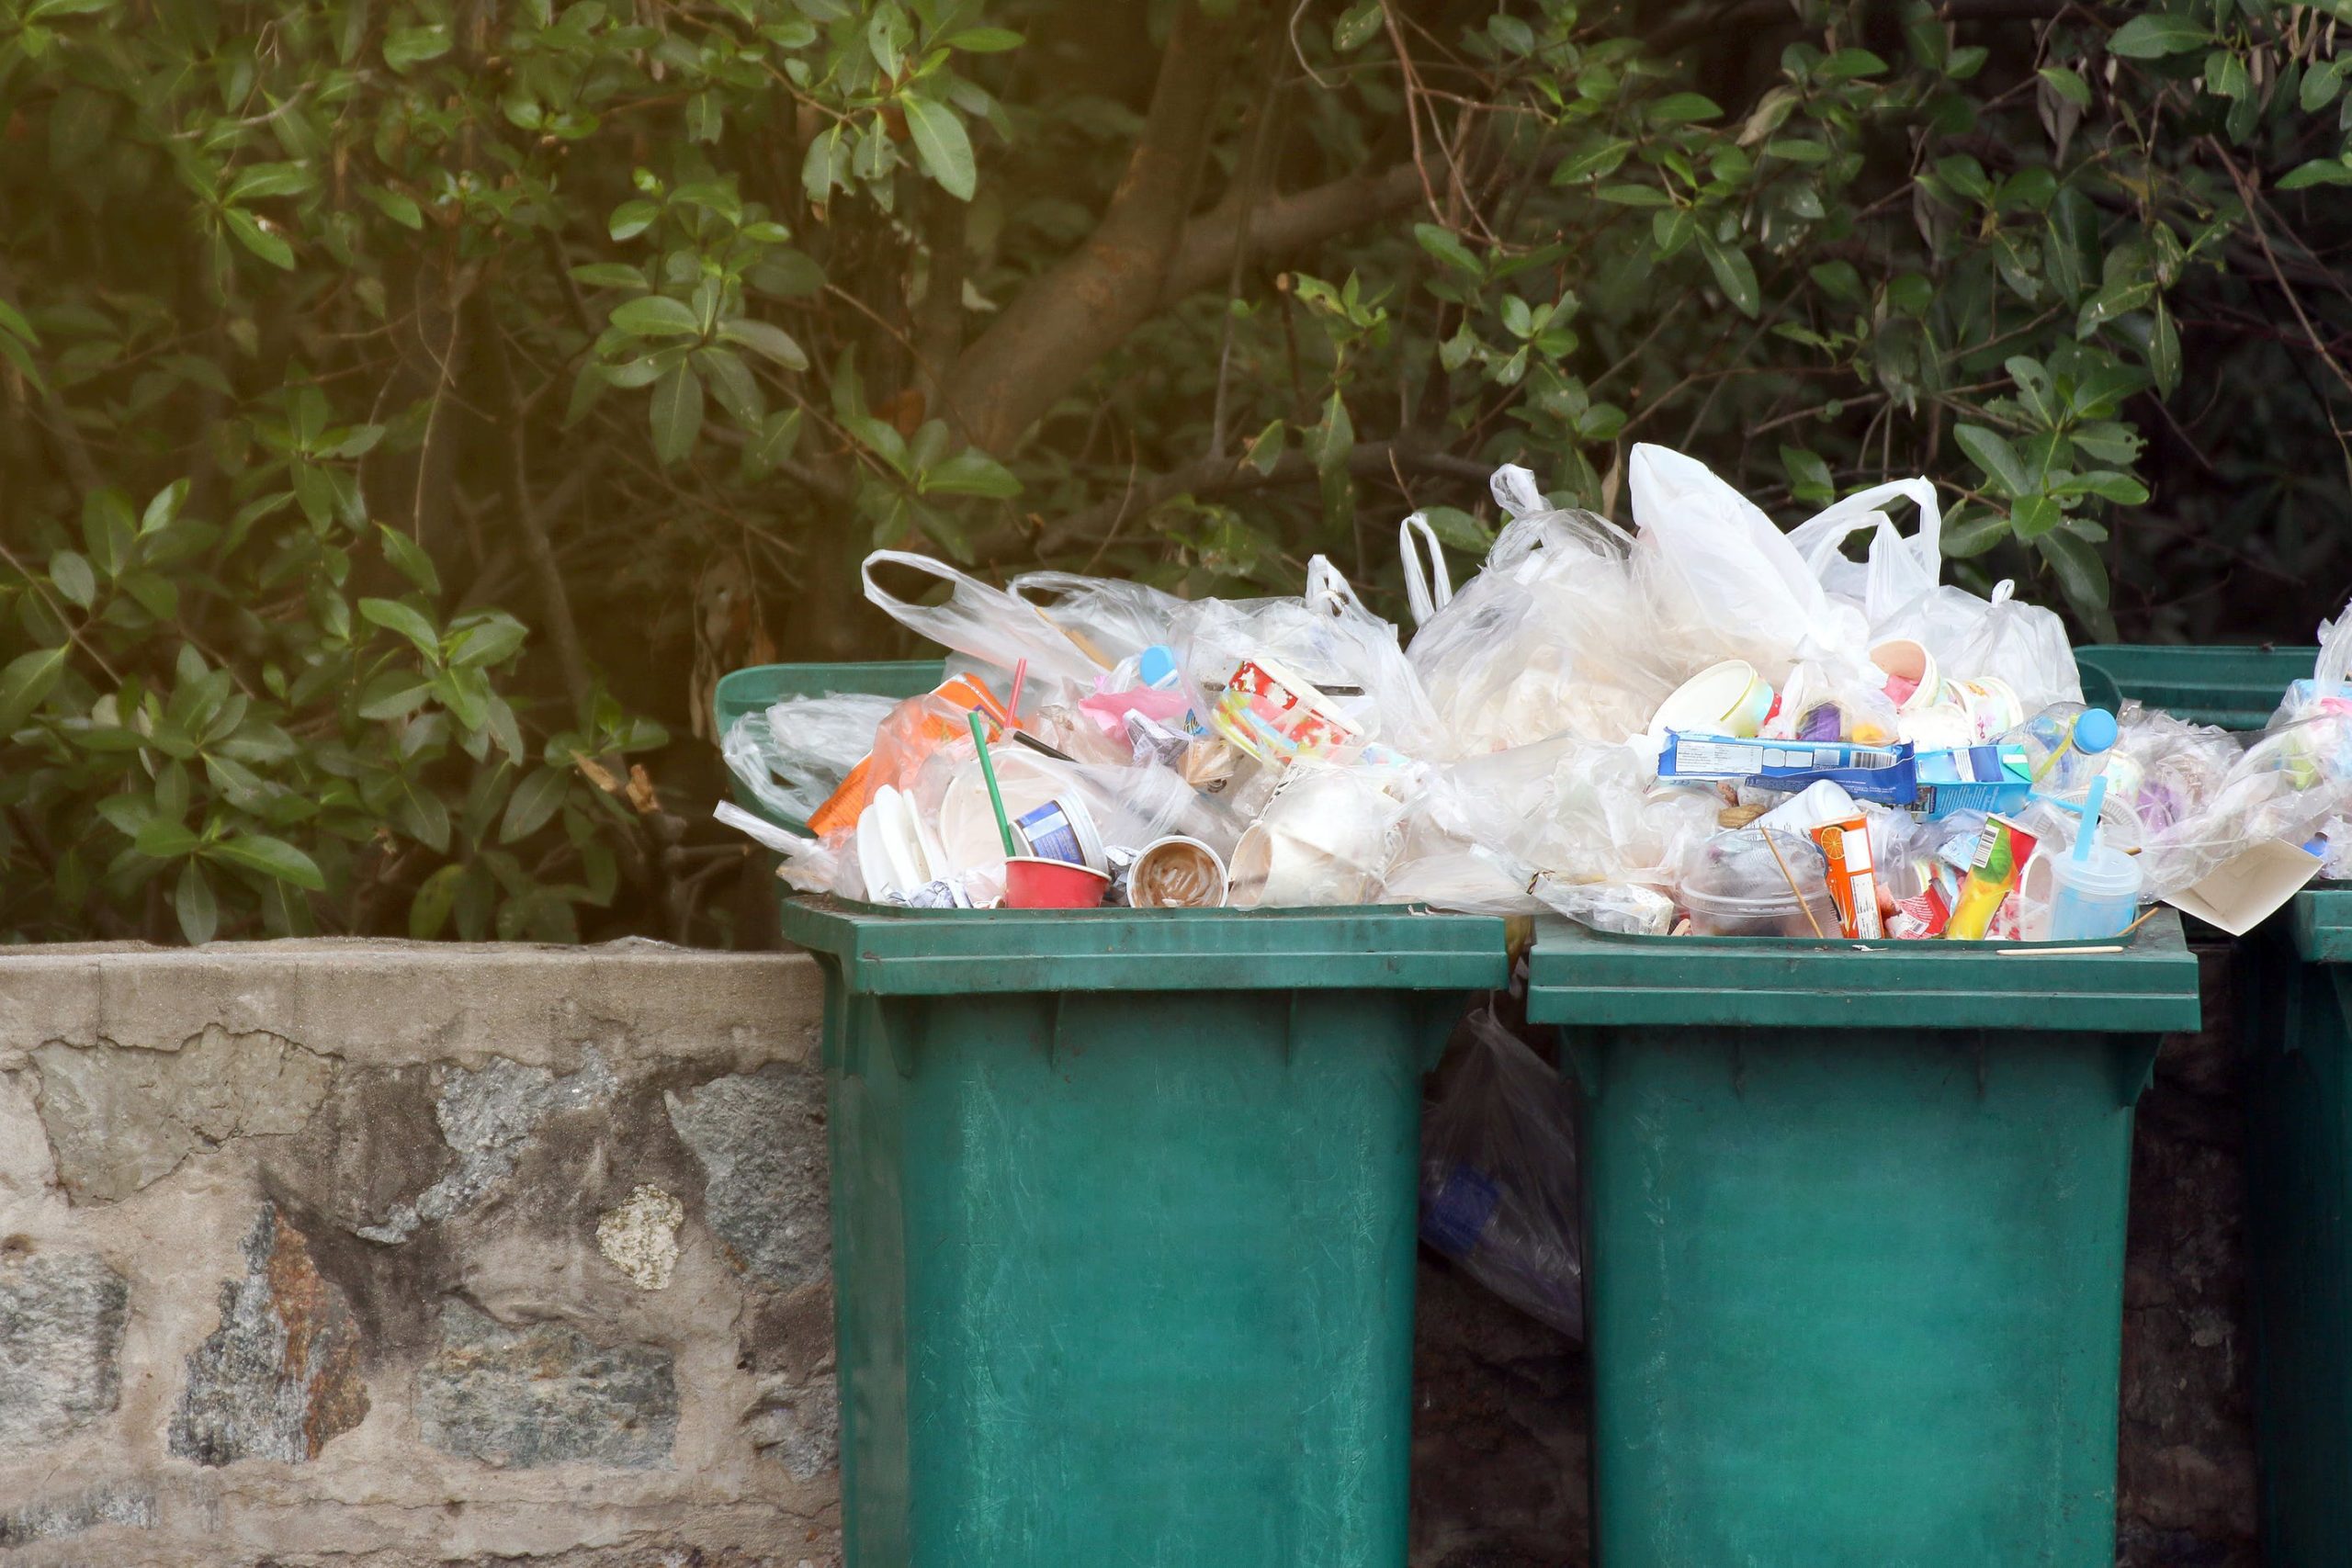 Featured image for “City decides against privatizing solid waste services”